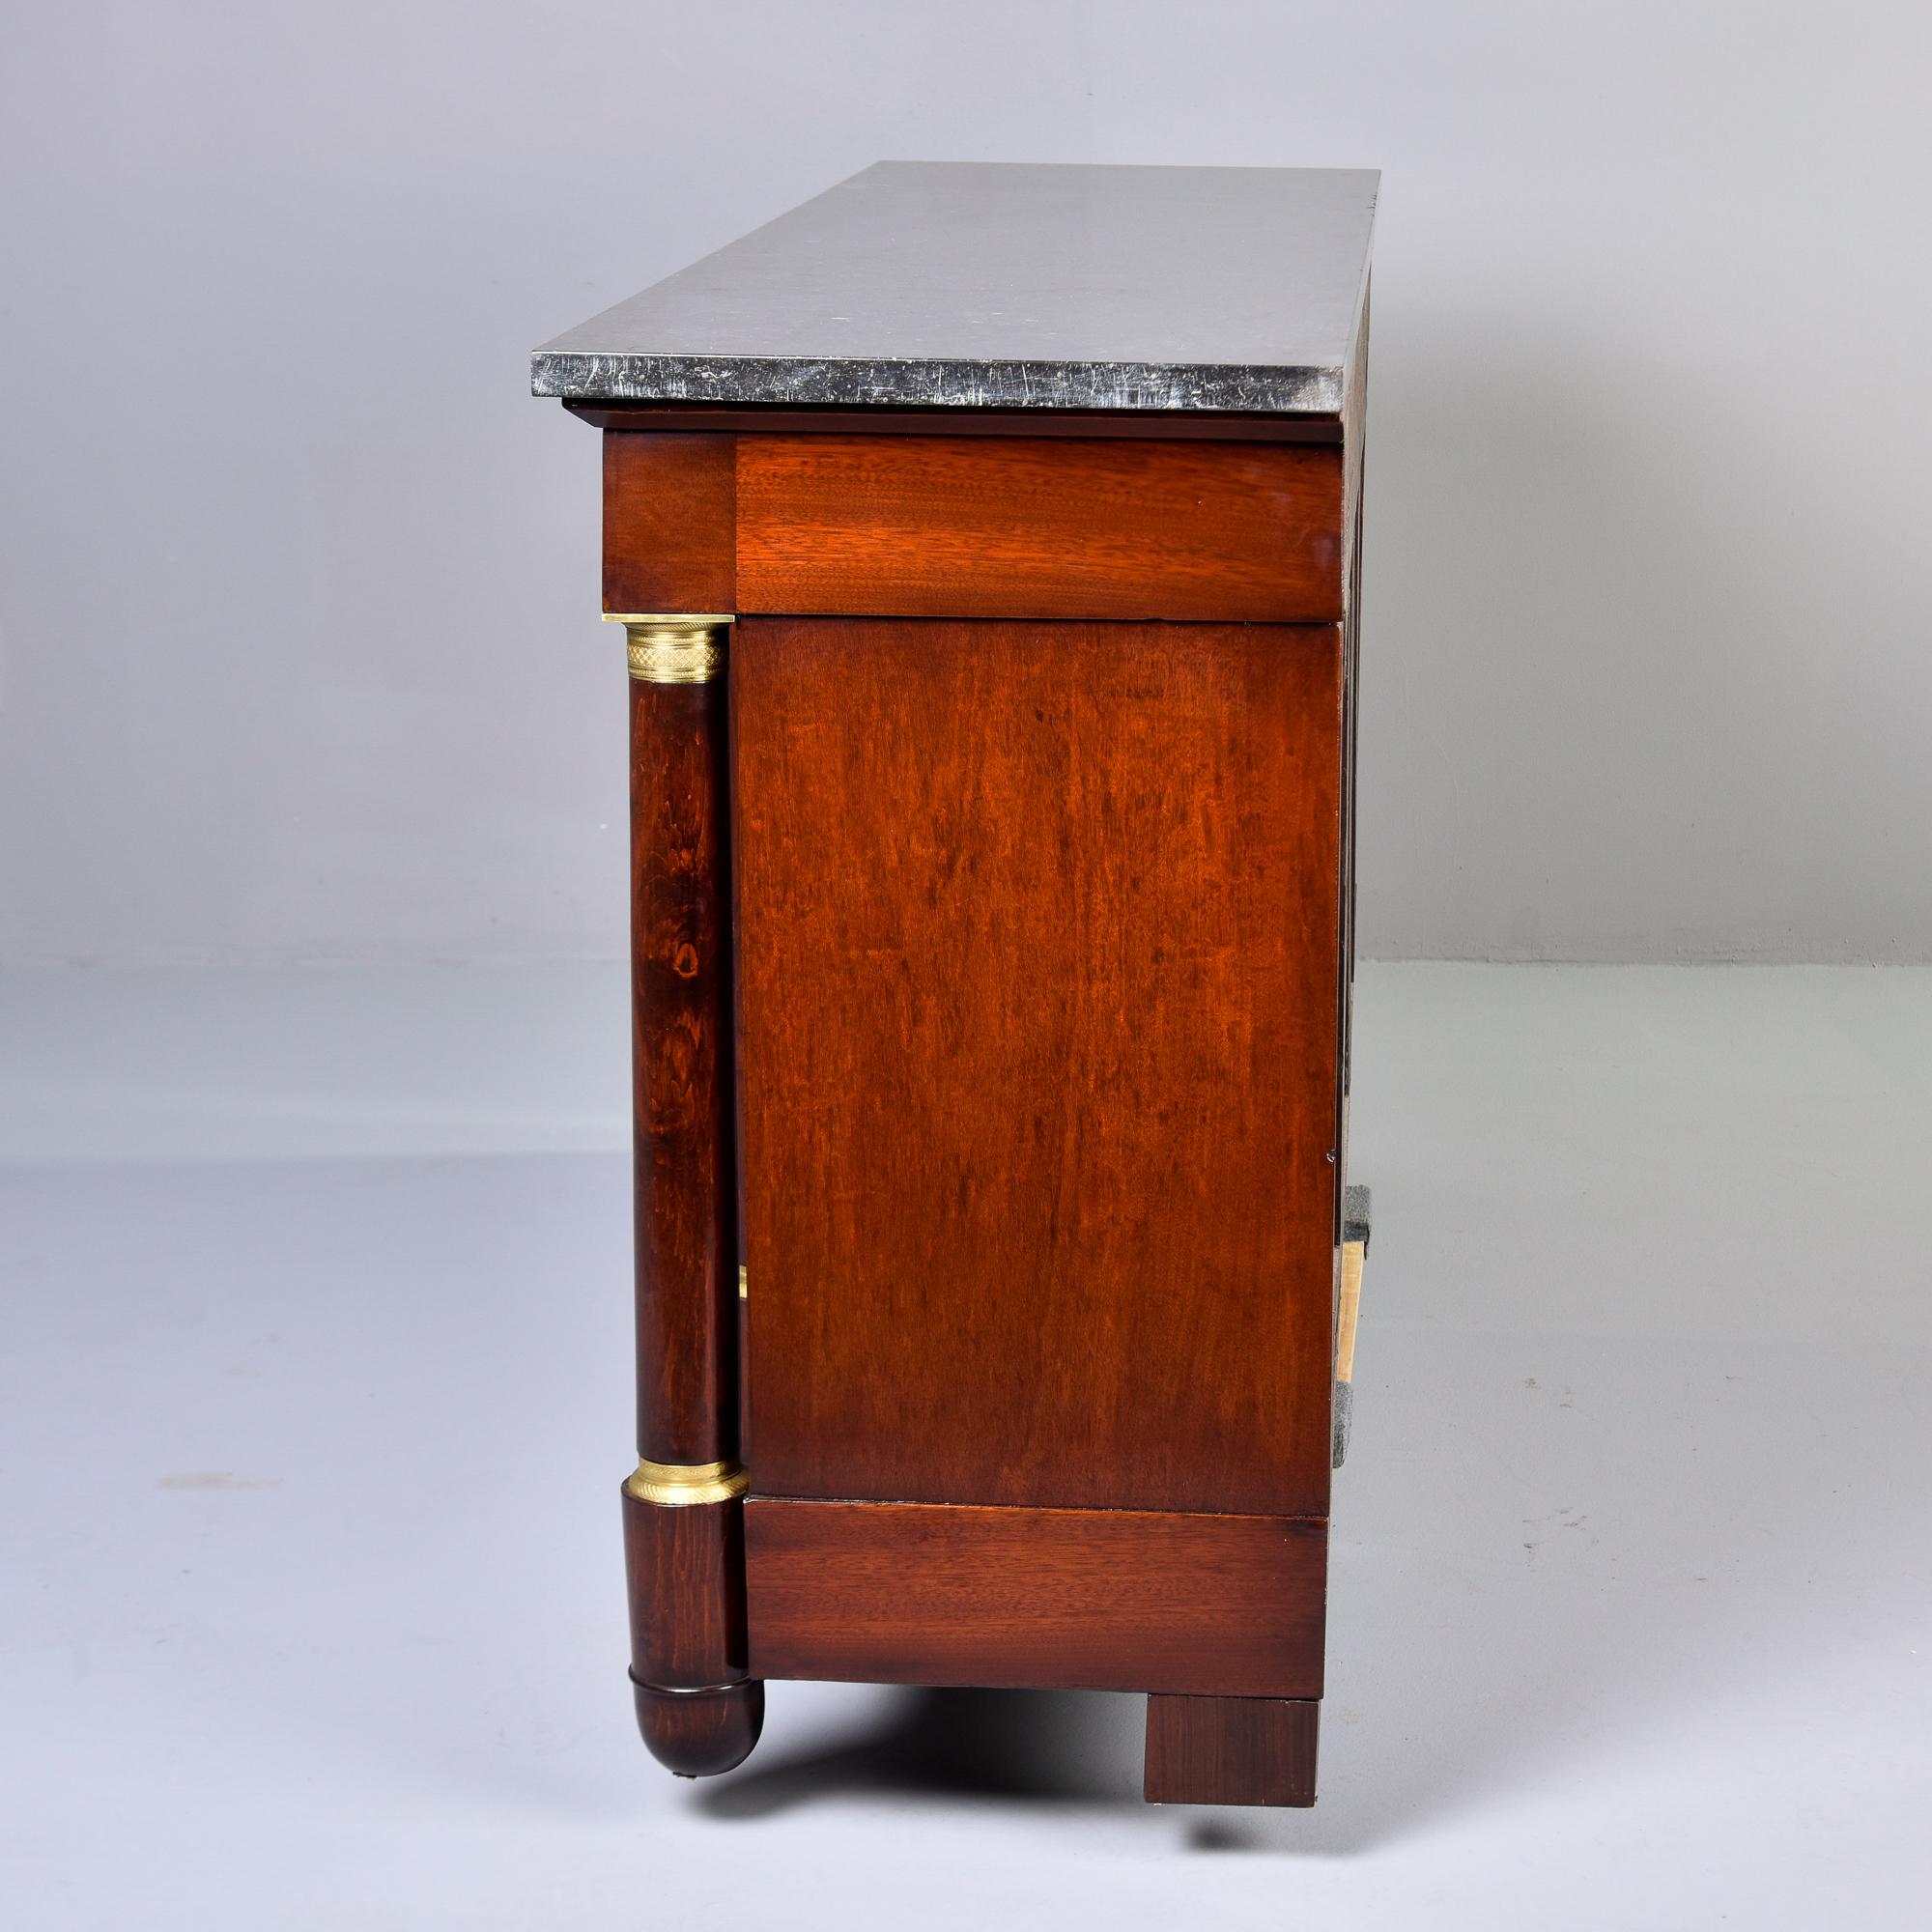 19th Century 19th C Louis XVI Style Pillared Cabinet with Black Marble Top and Brass Accents